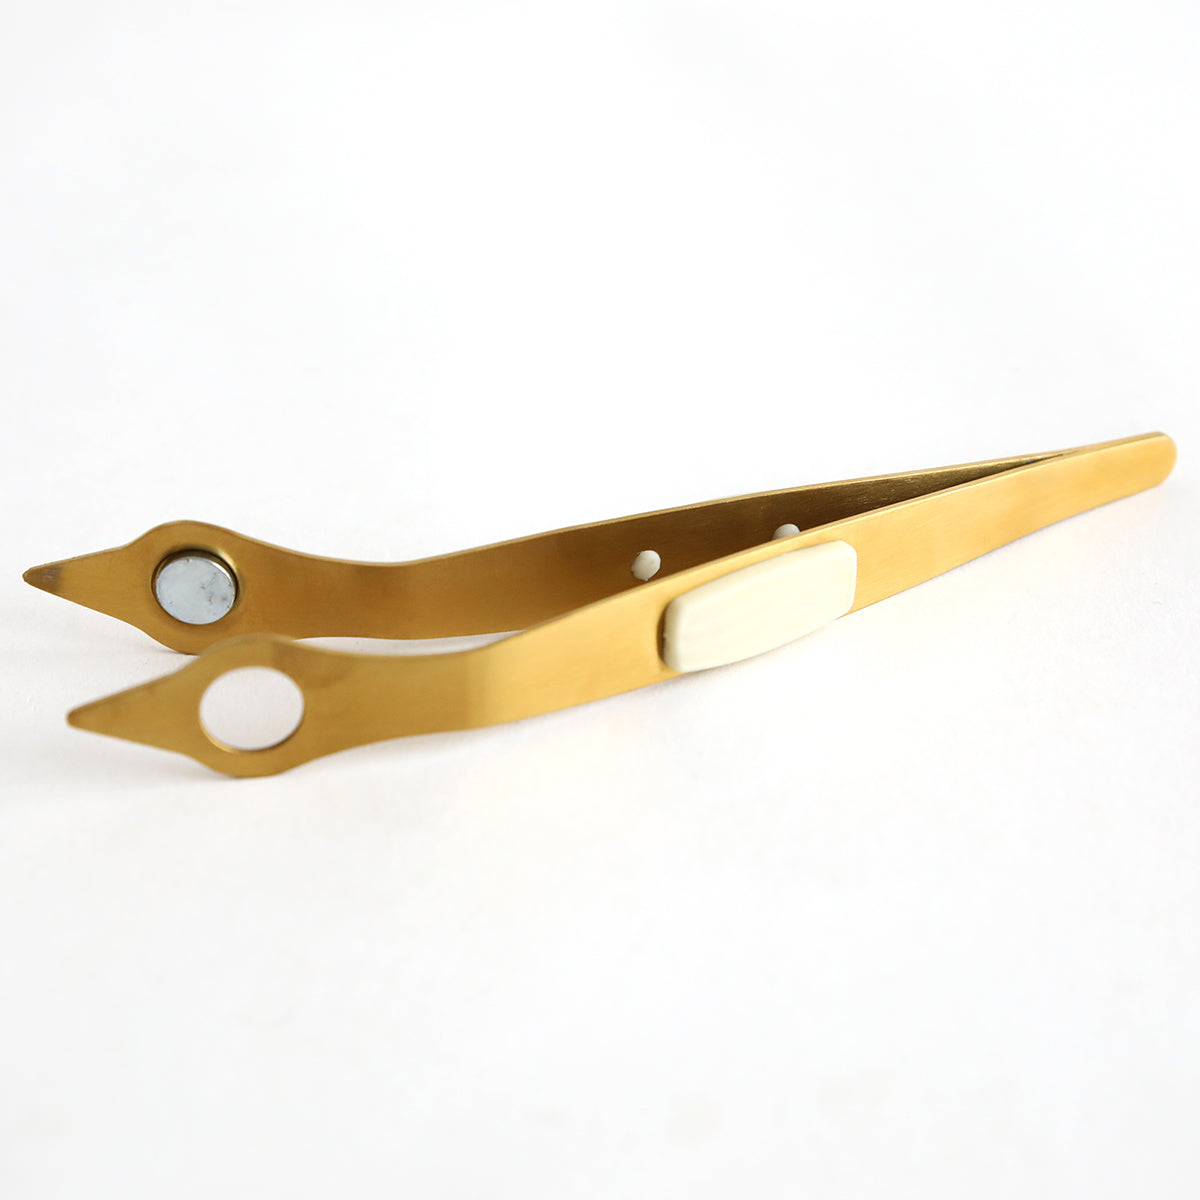 A pair of gold Magnetic Tweezers on a white surface.